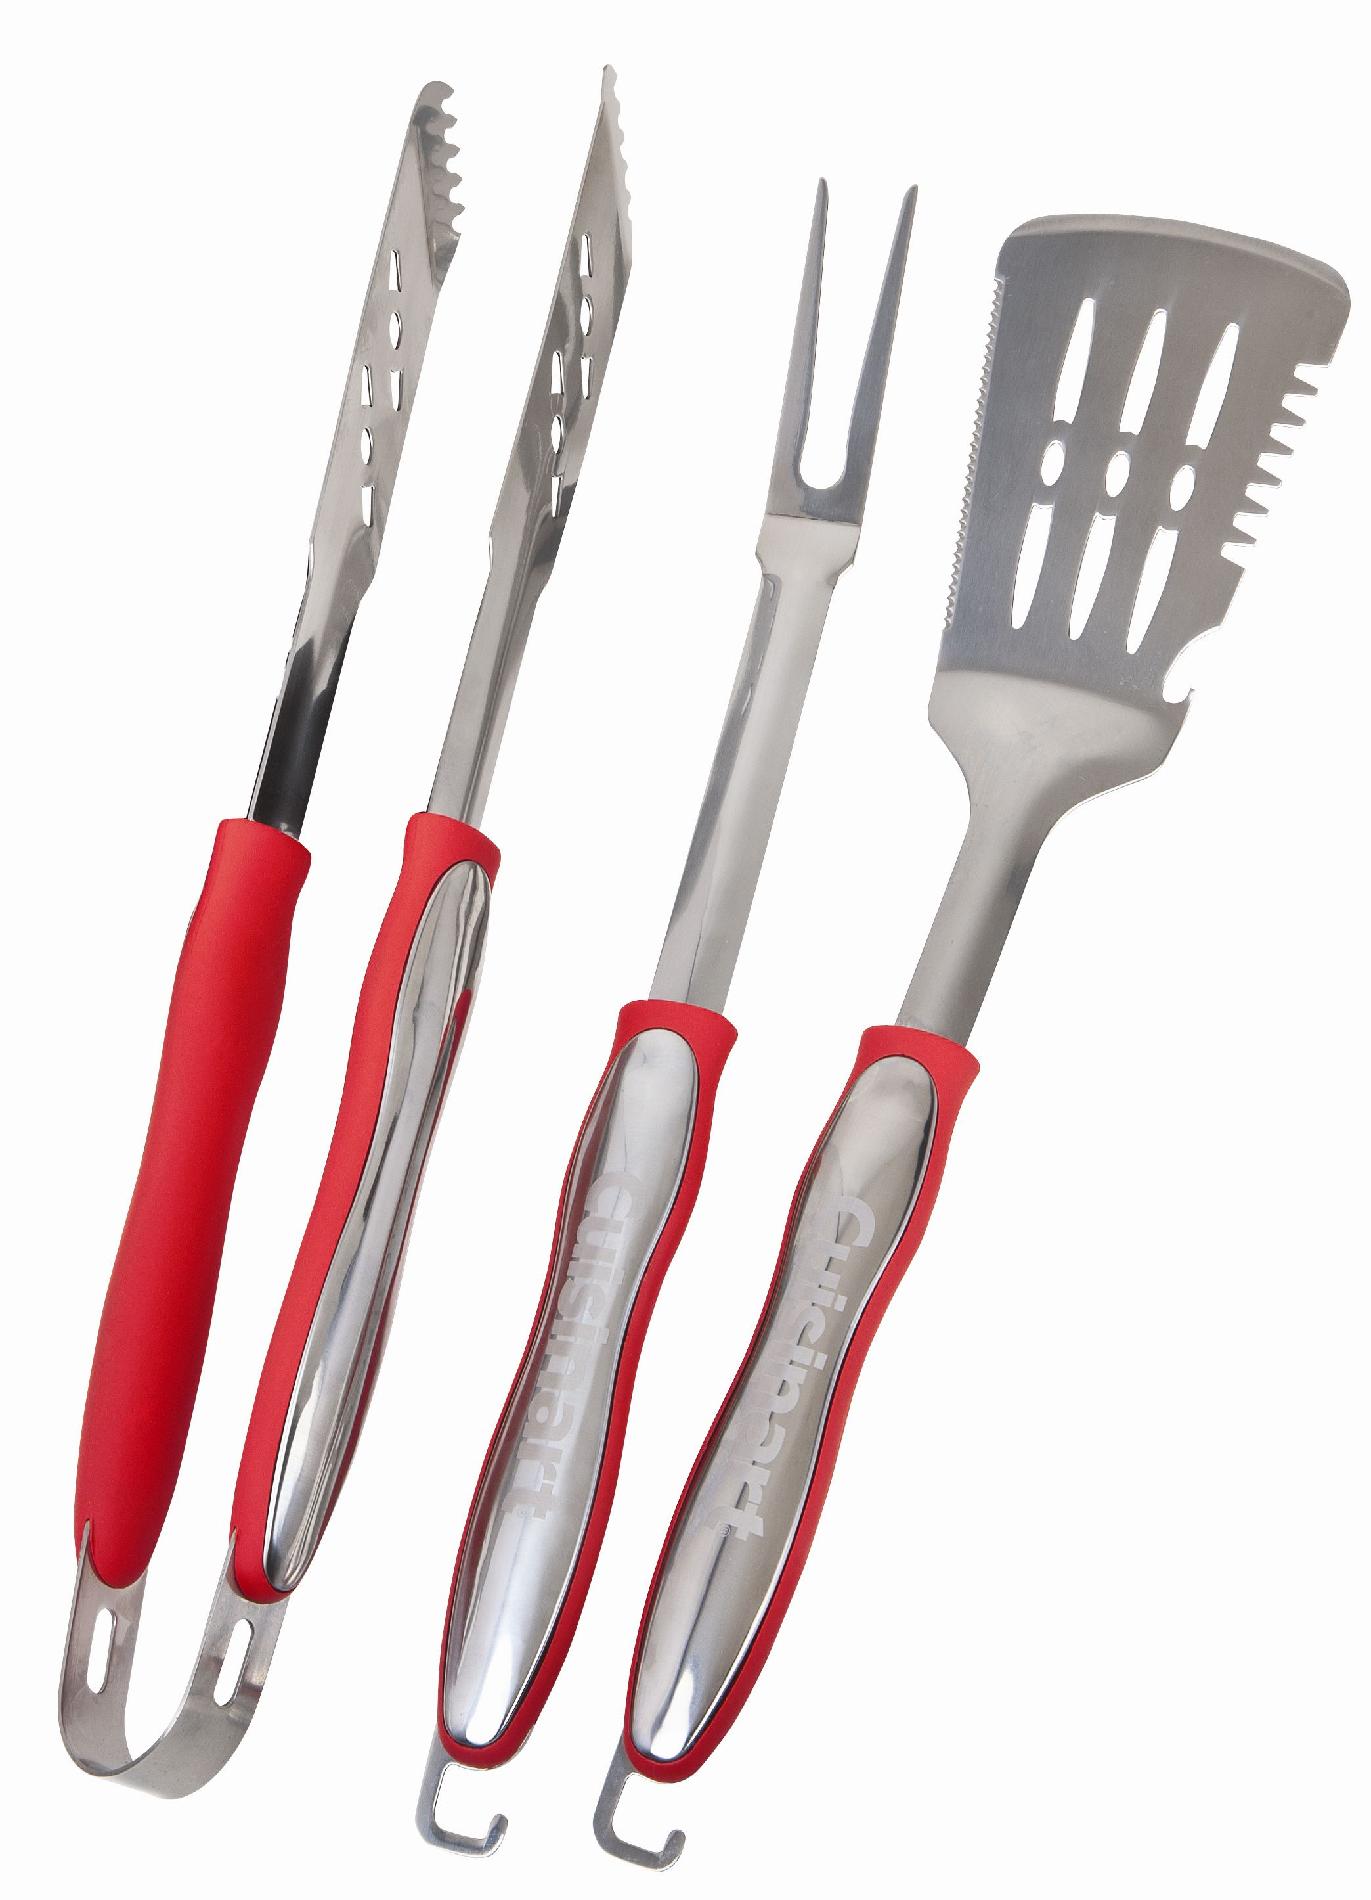 Cuisinart 3 Pc. Grilling Tool Set - Red